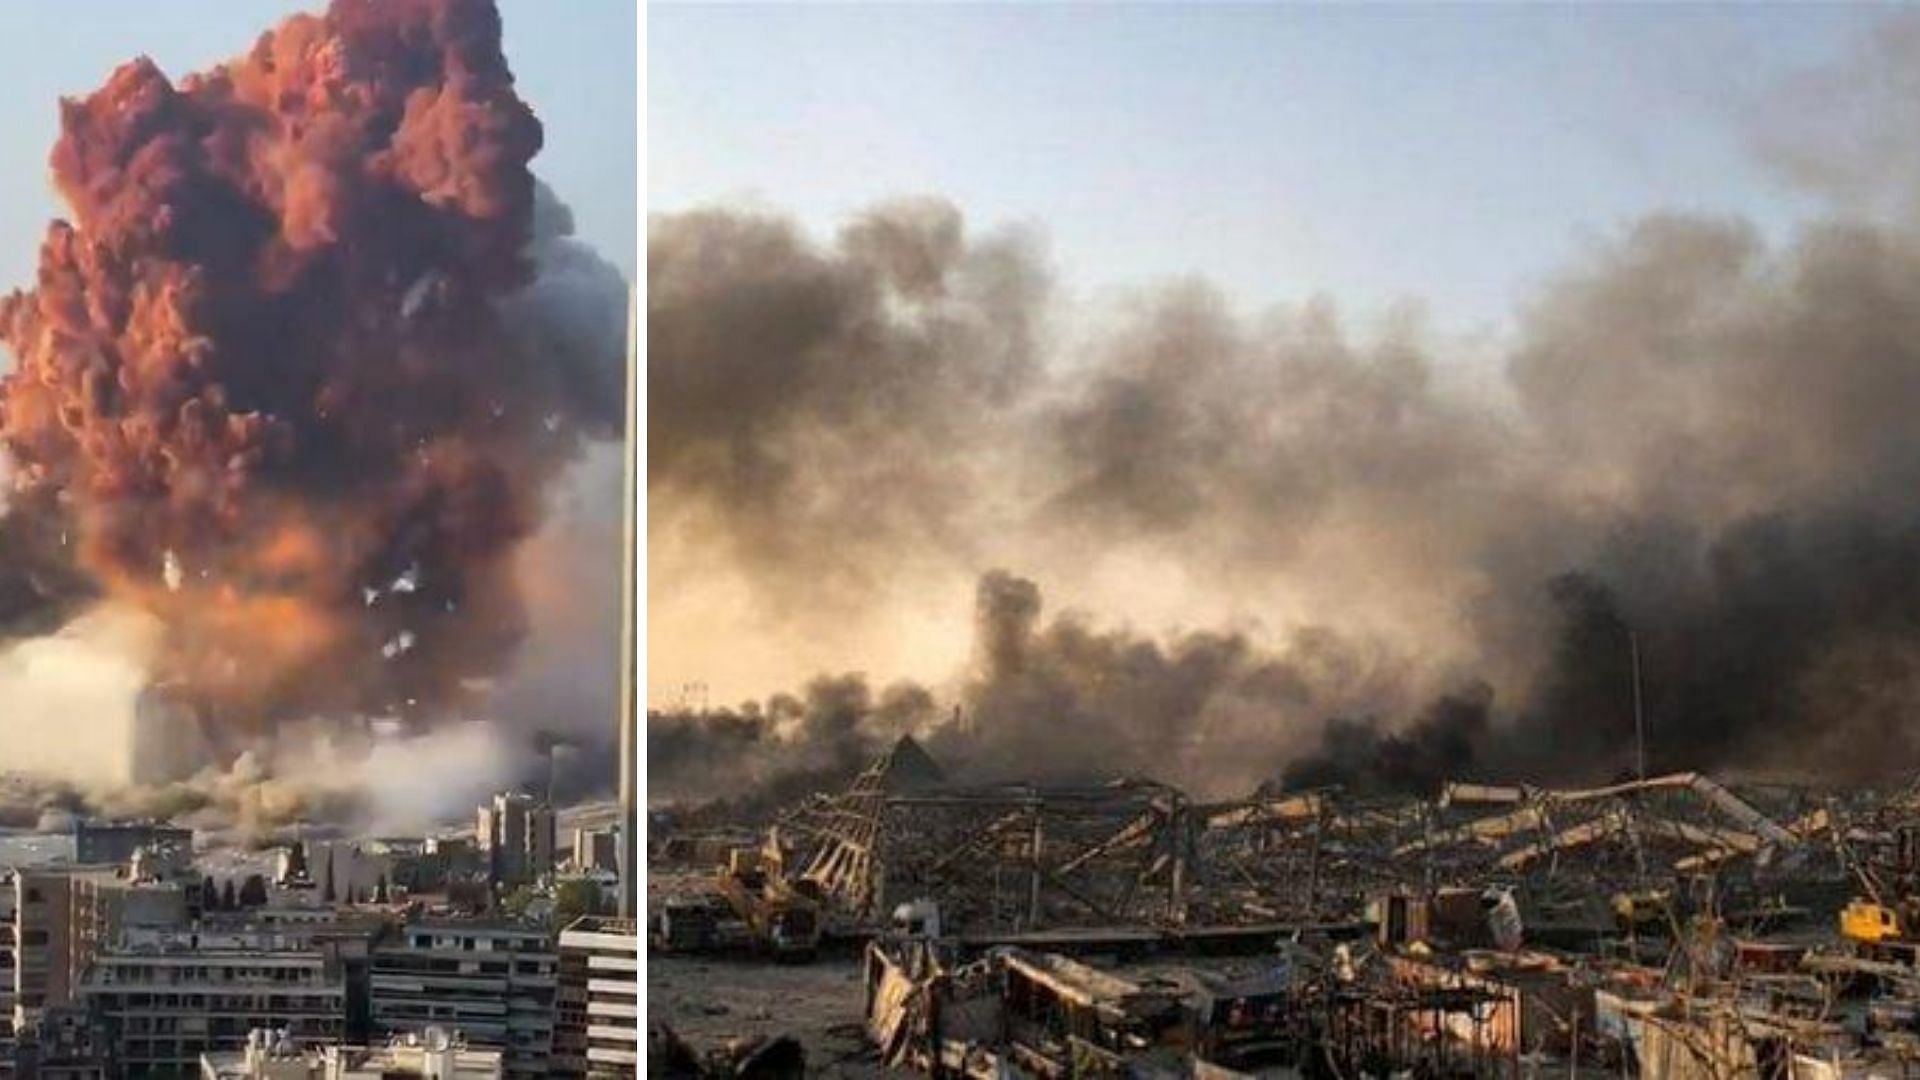 A massive explosion rocked the Lebanese capital Beirut on Tuesday, 4 August.